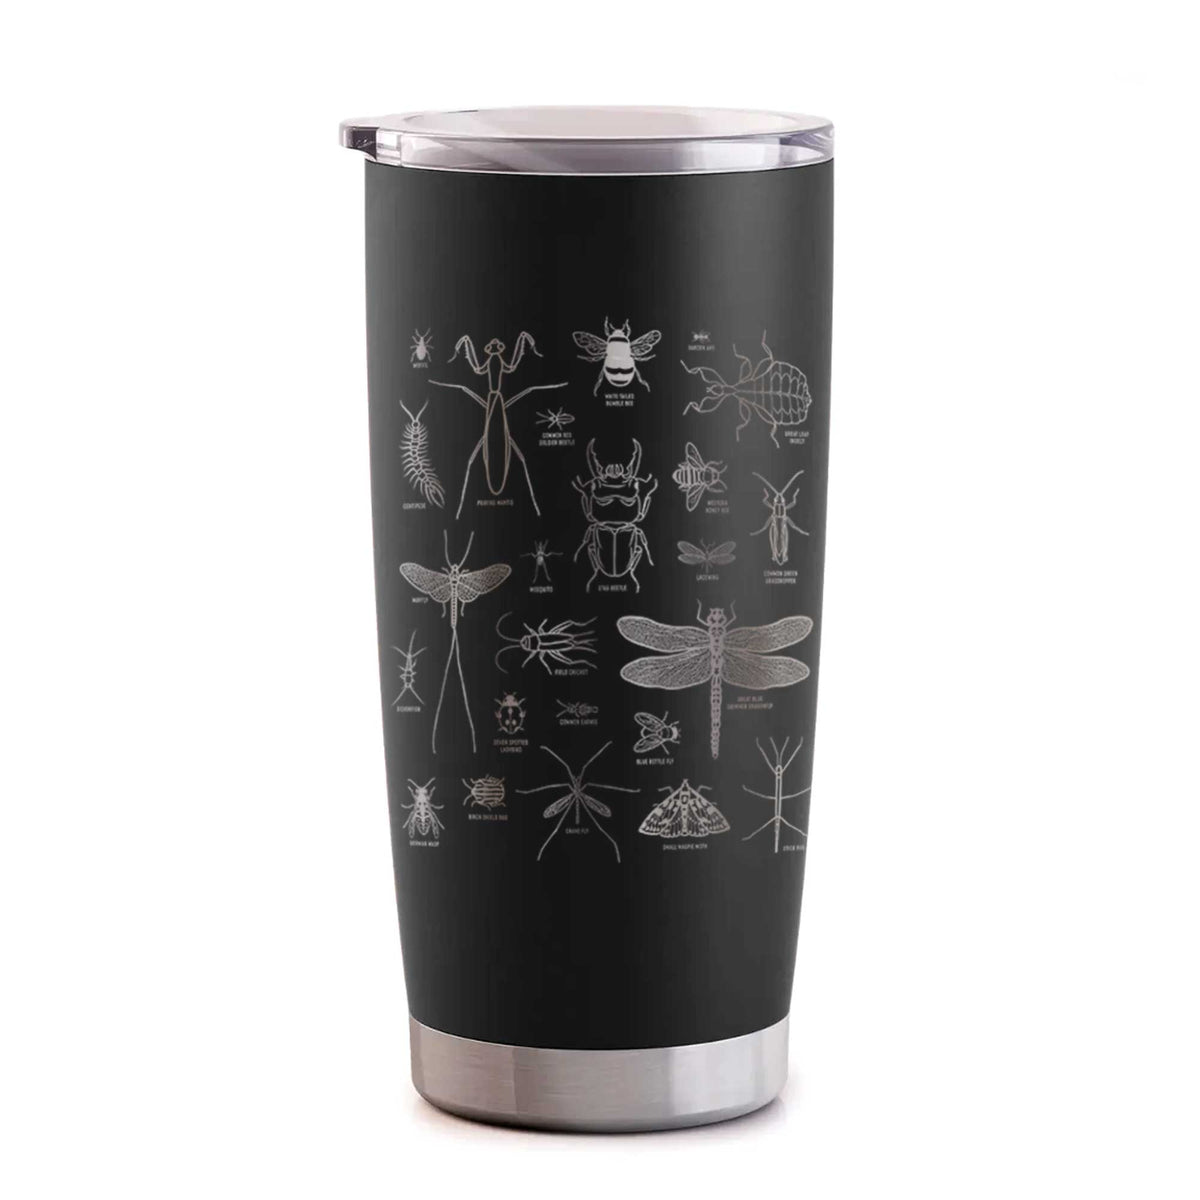 Chart of Arthropods/Insects - 20oz Polar Insulated Tumbler